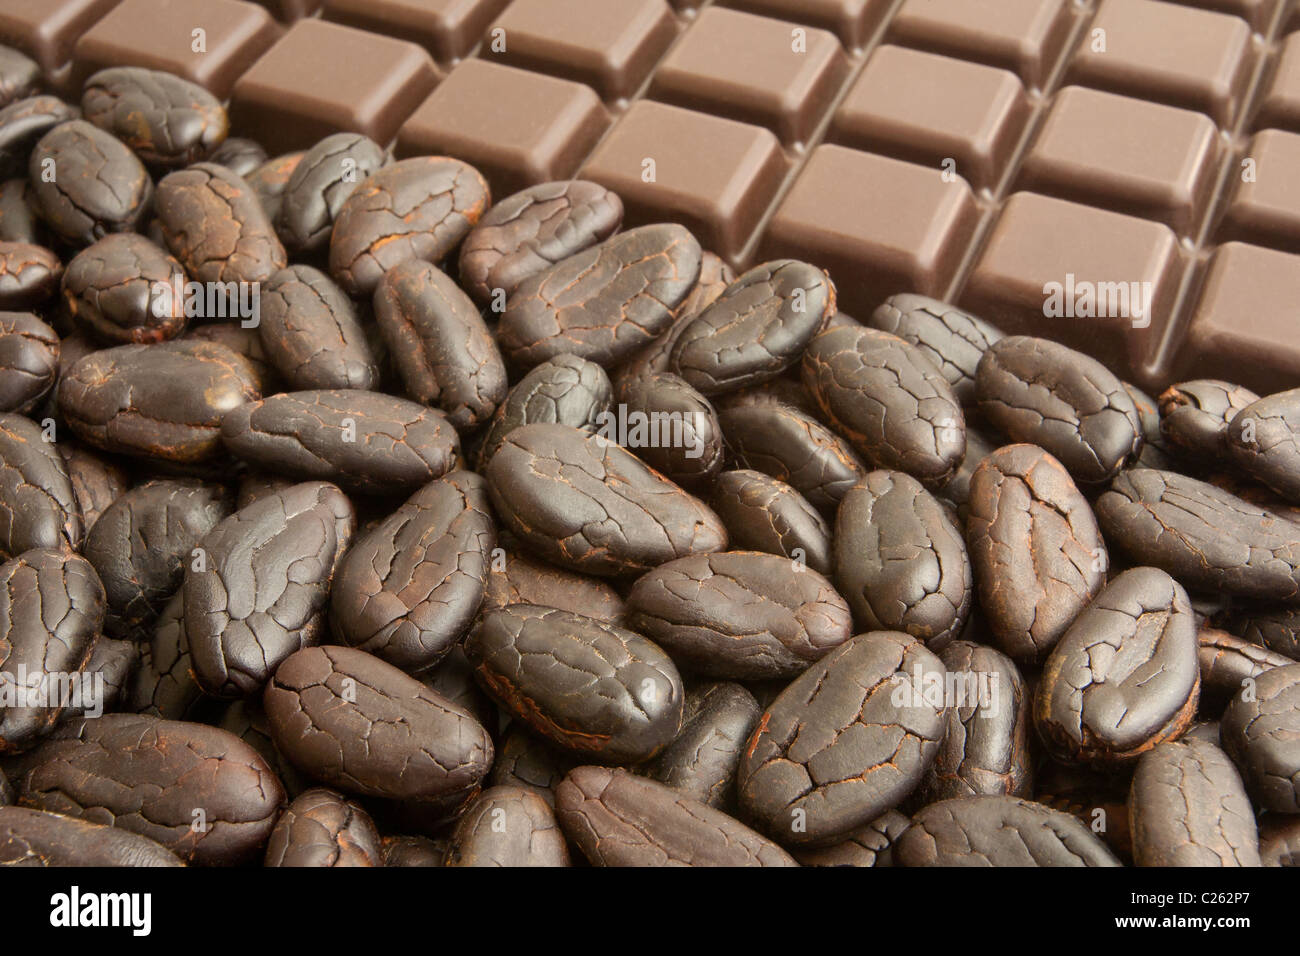 Bar of chocolate, and cocoa beans Stock Photo